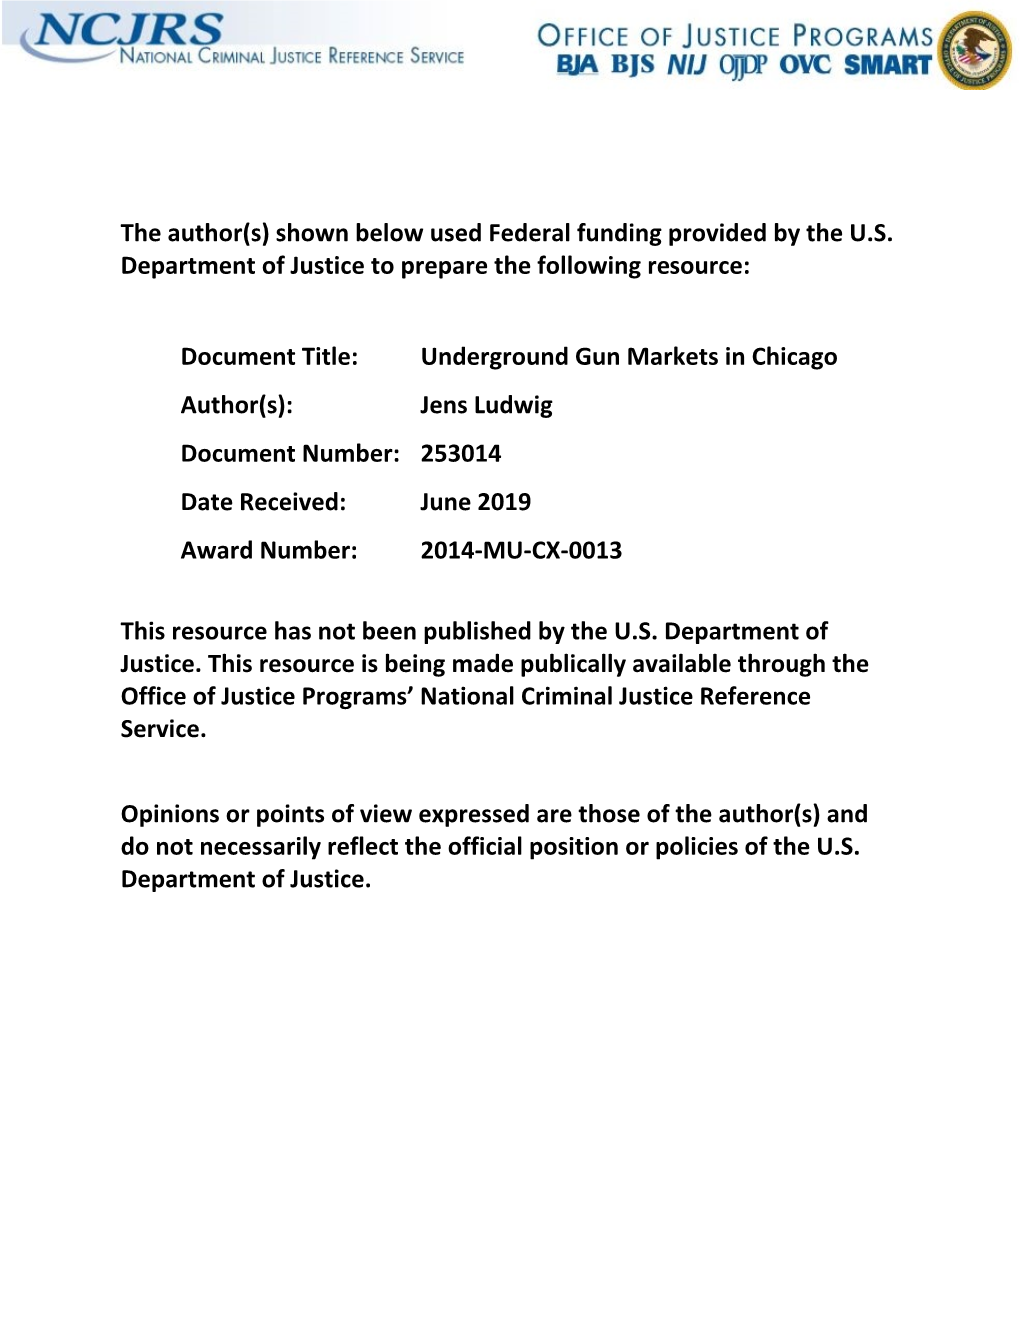 Underground Gun Markets in Chicago Author(S): Jens Ludwig Document Number: 253014 Date Received: June 2019 Award Number: 2014-MU-CX-0013